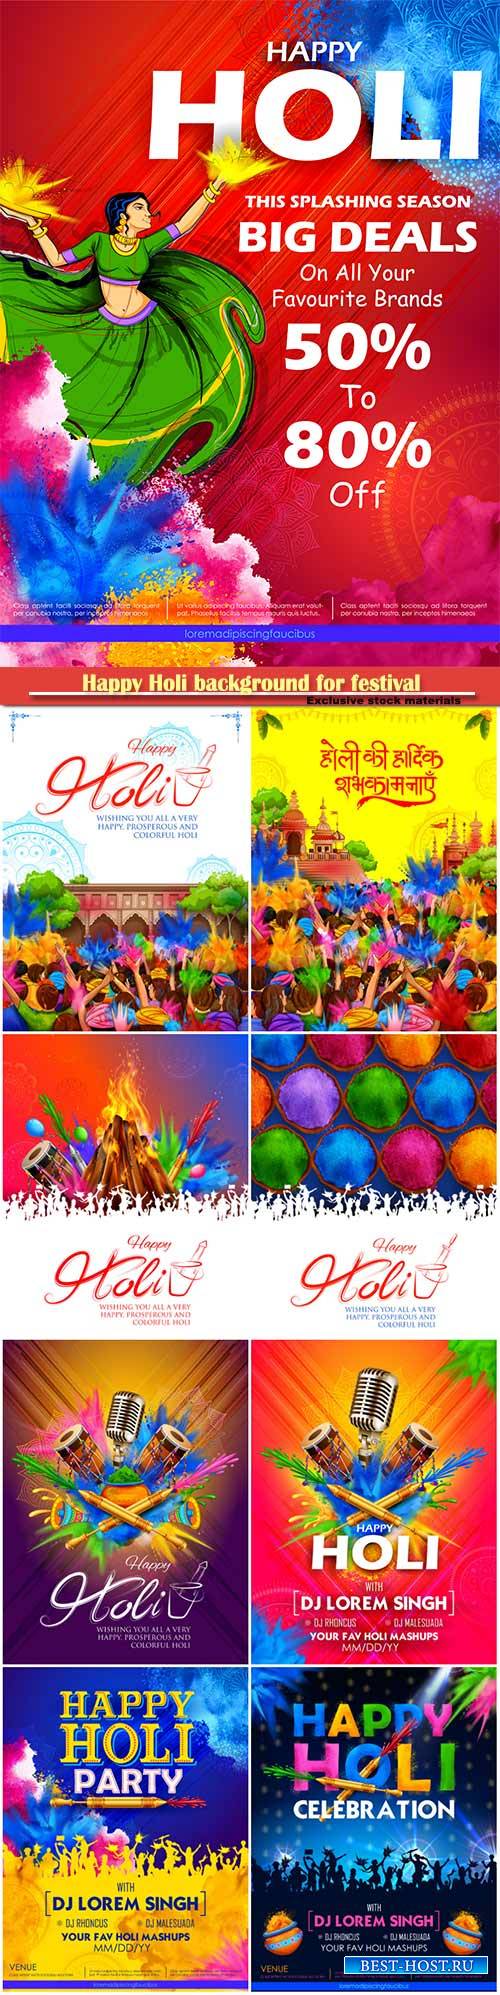 Happy Holi background for festival of colors celebration greetings